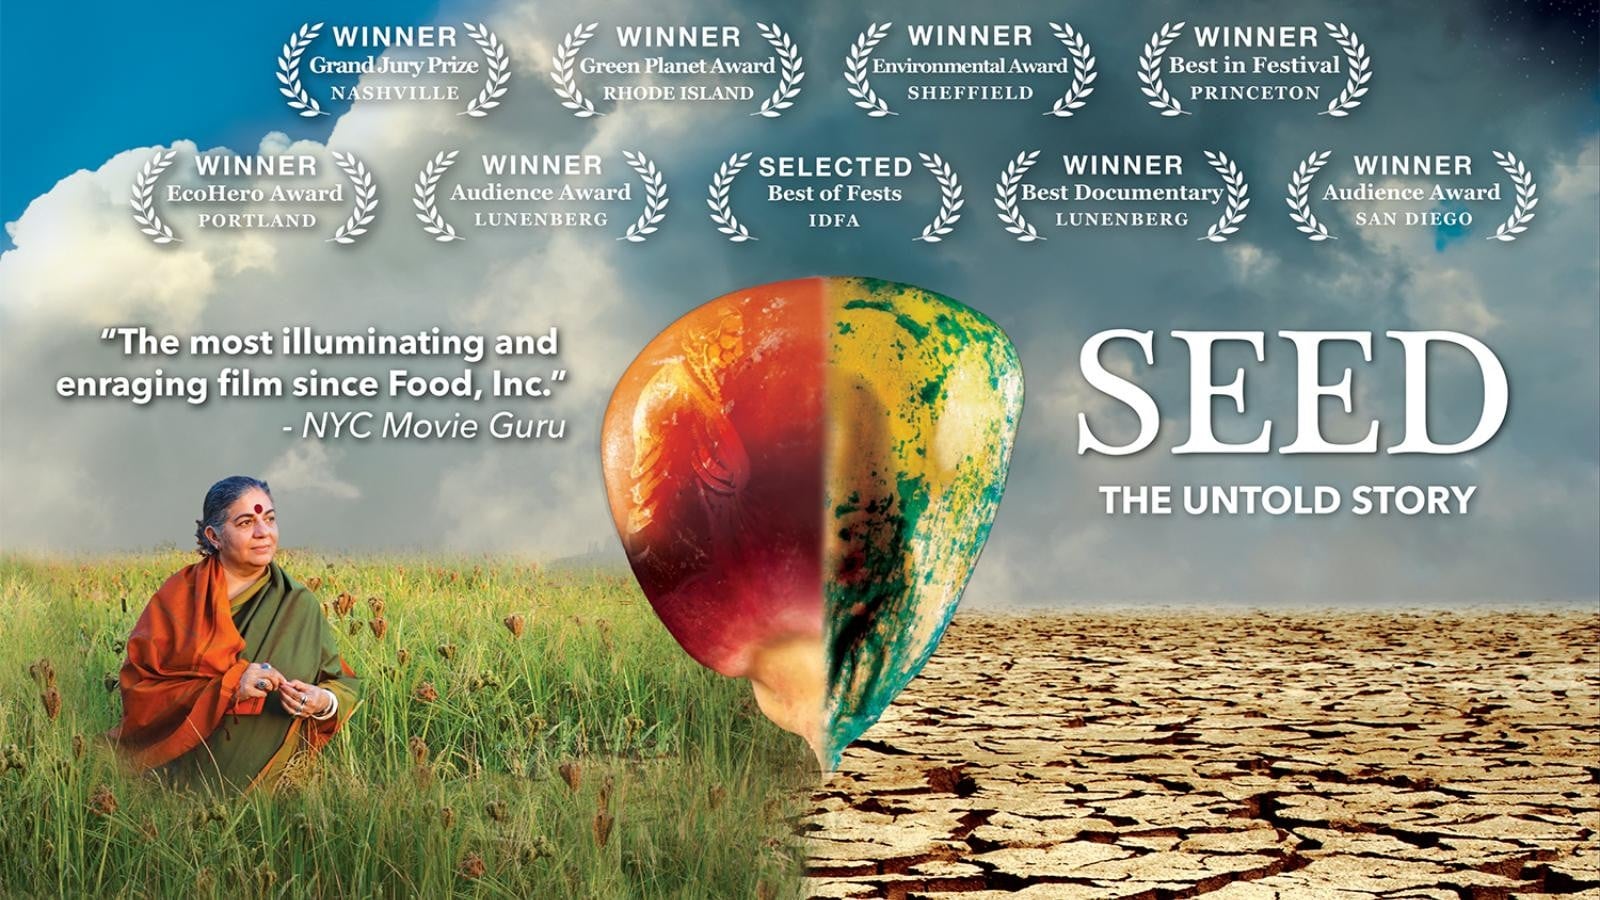 Seed: The Untold Story